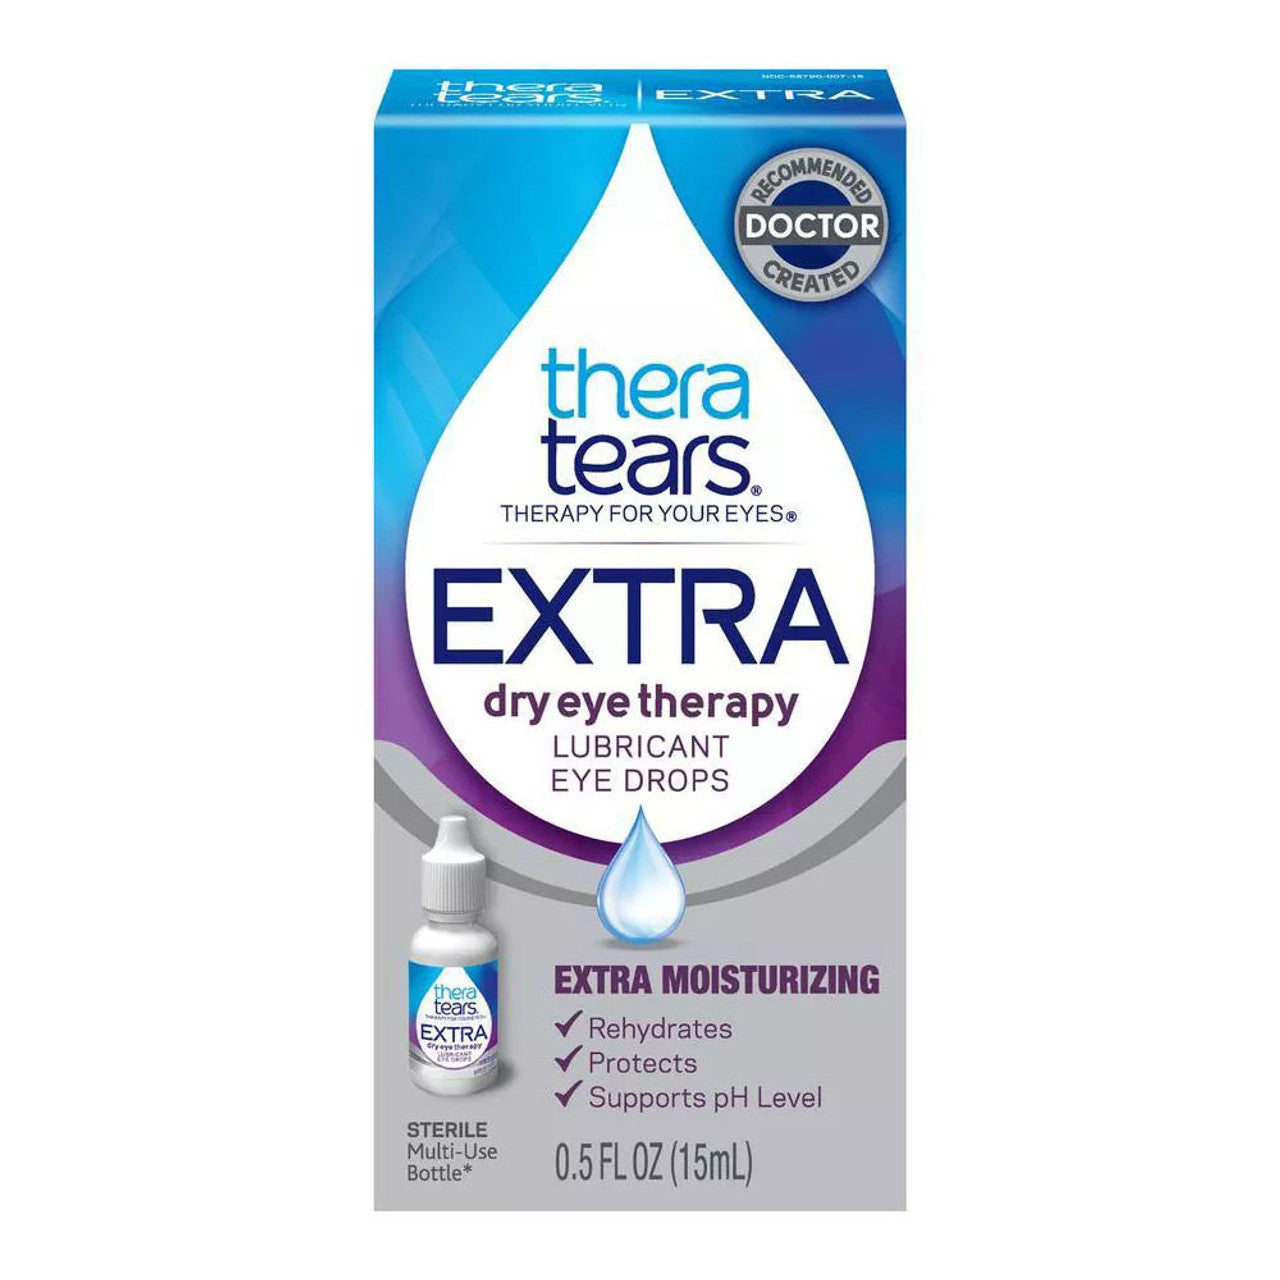 TheraTears Extra Dry Eye Therapy Lubricating Eye Drops for Dry Eyes, 0.5 Oz